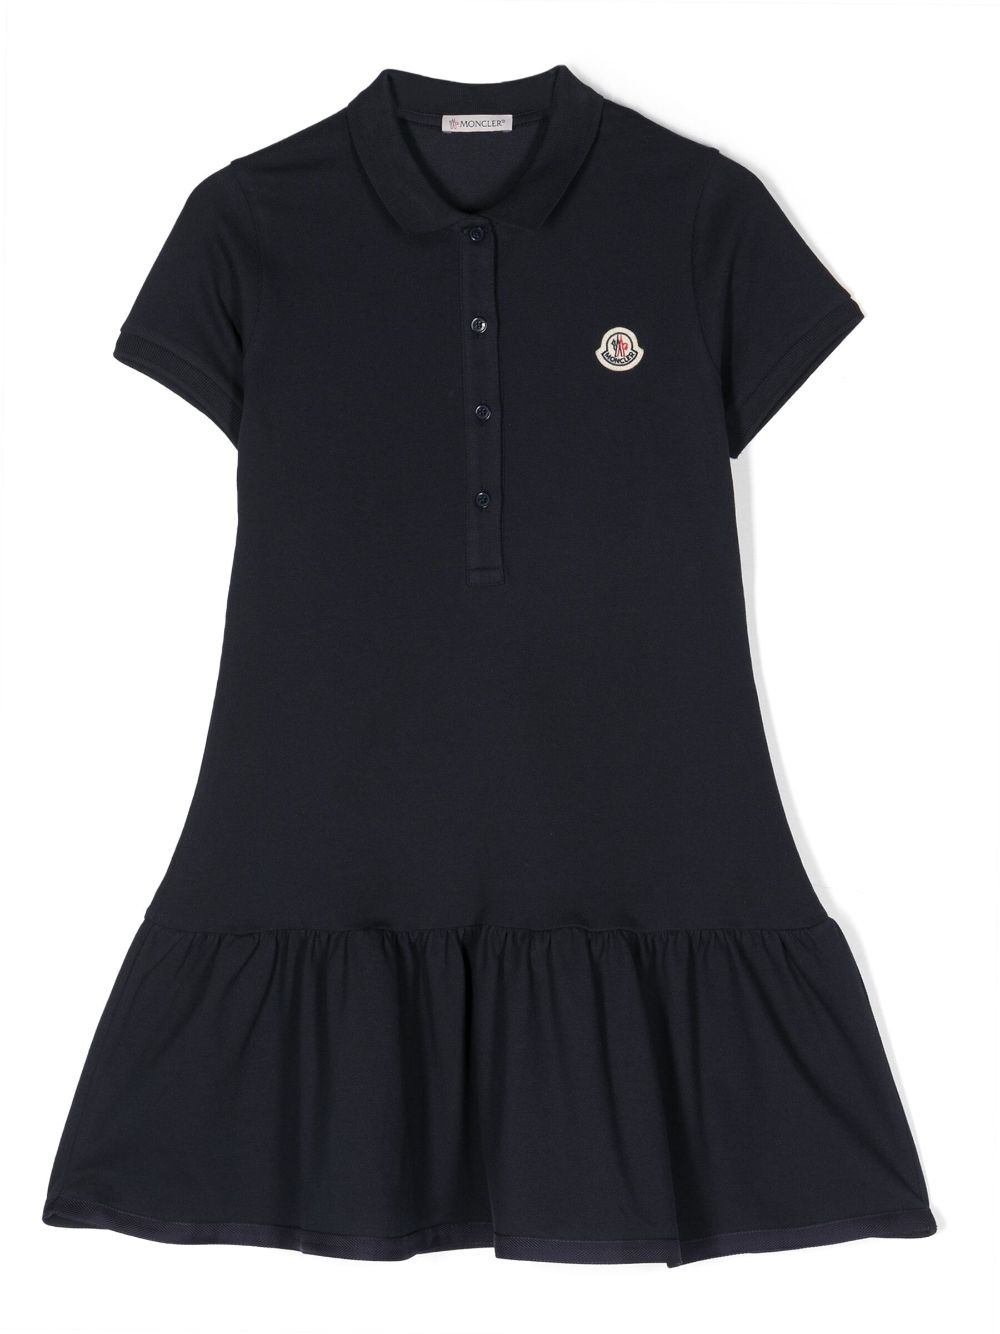 Navy blue dress for girls with logo